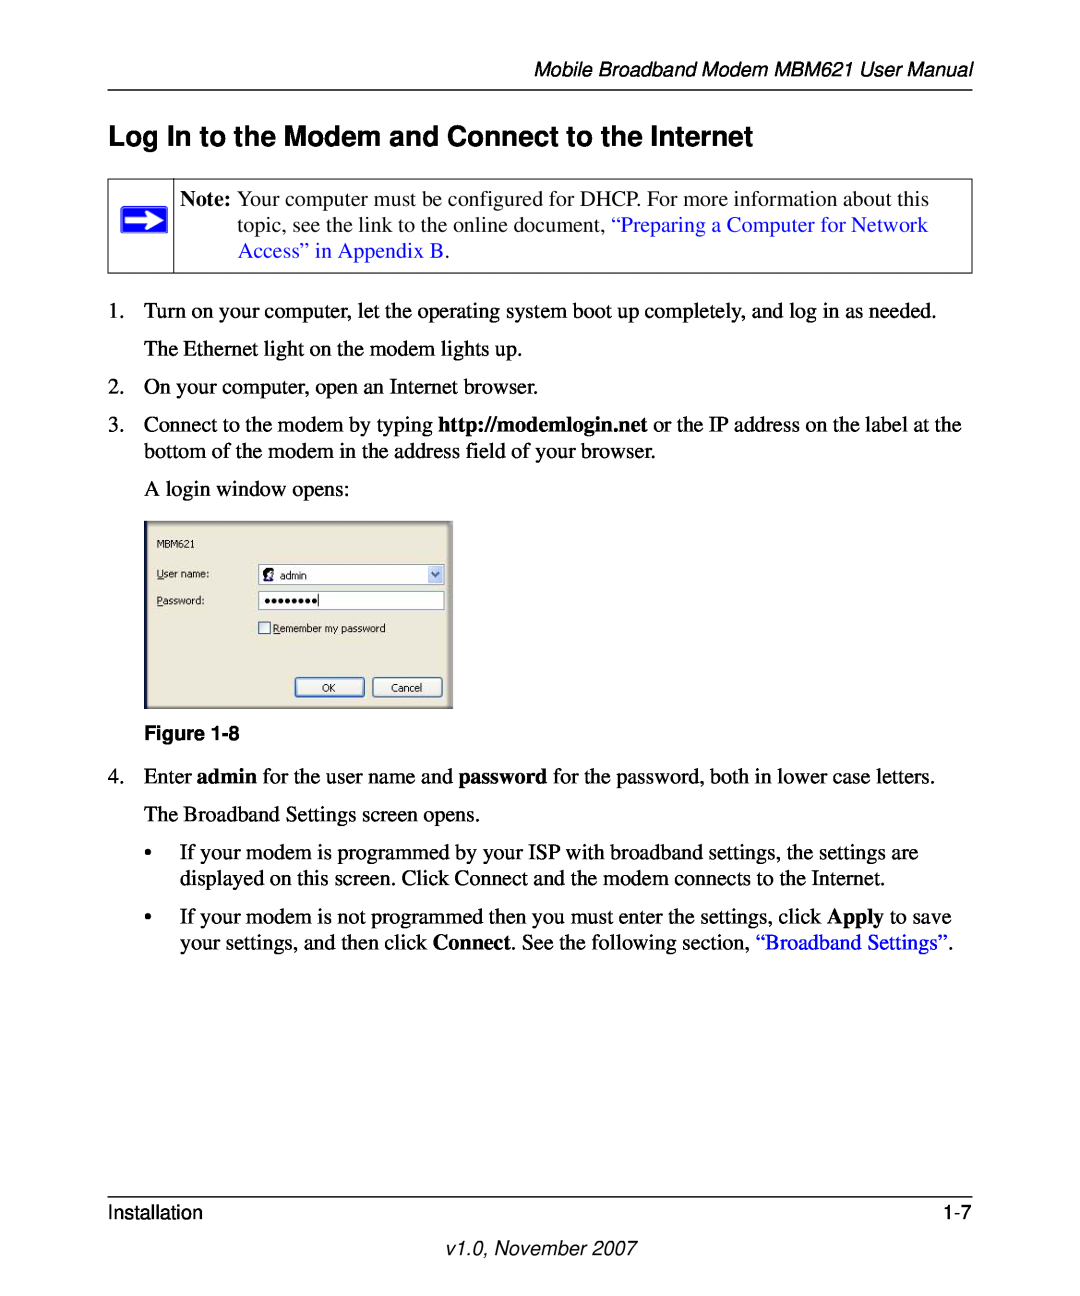 NETGEAR MBM621 user manual Log In to the Modem and Connect to the Internet, Access” in Appendix B 